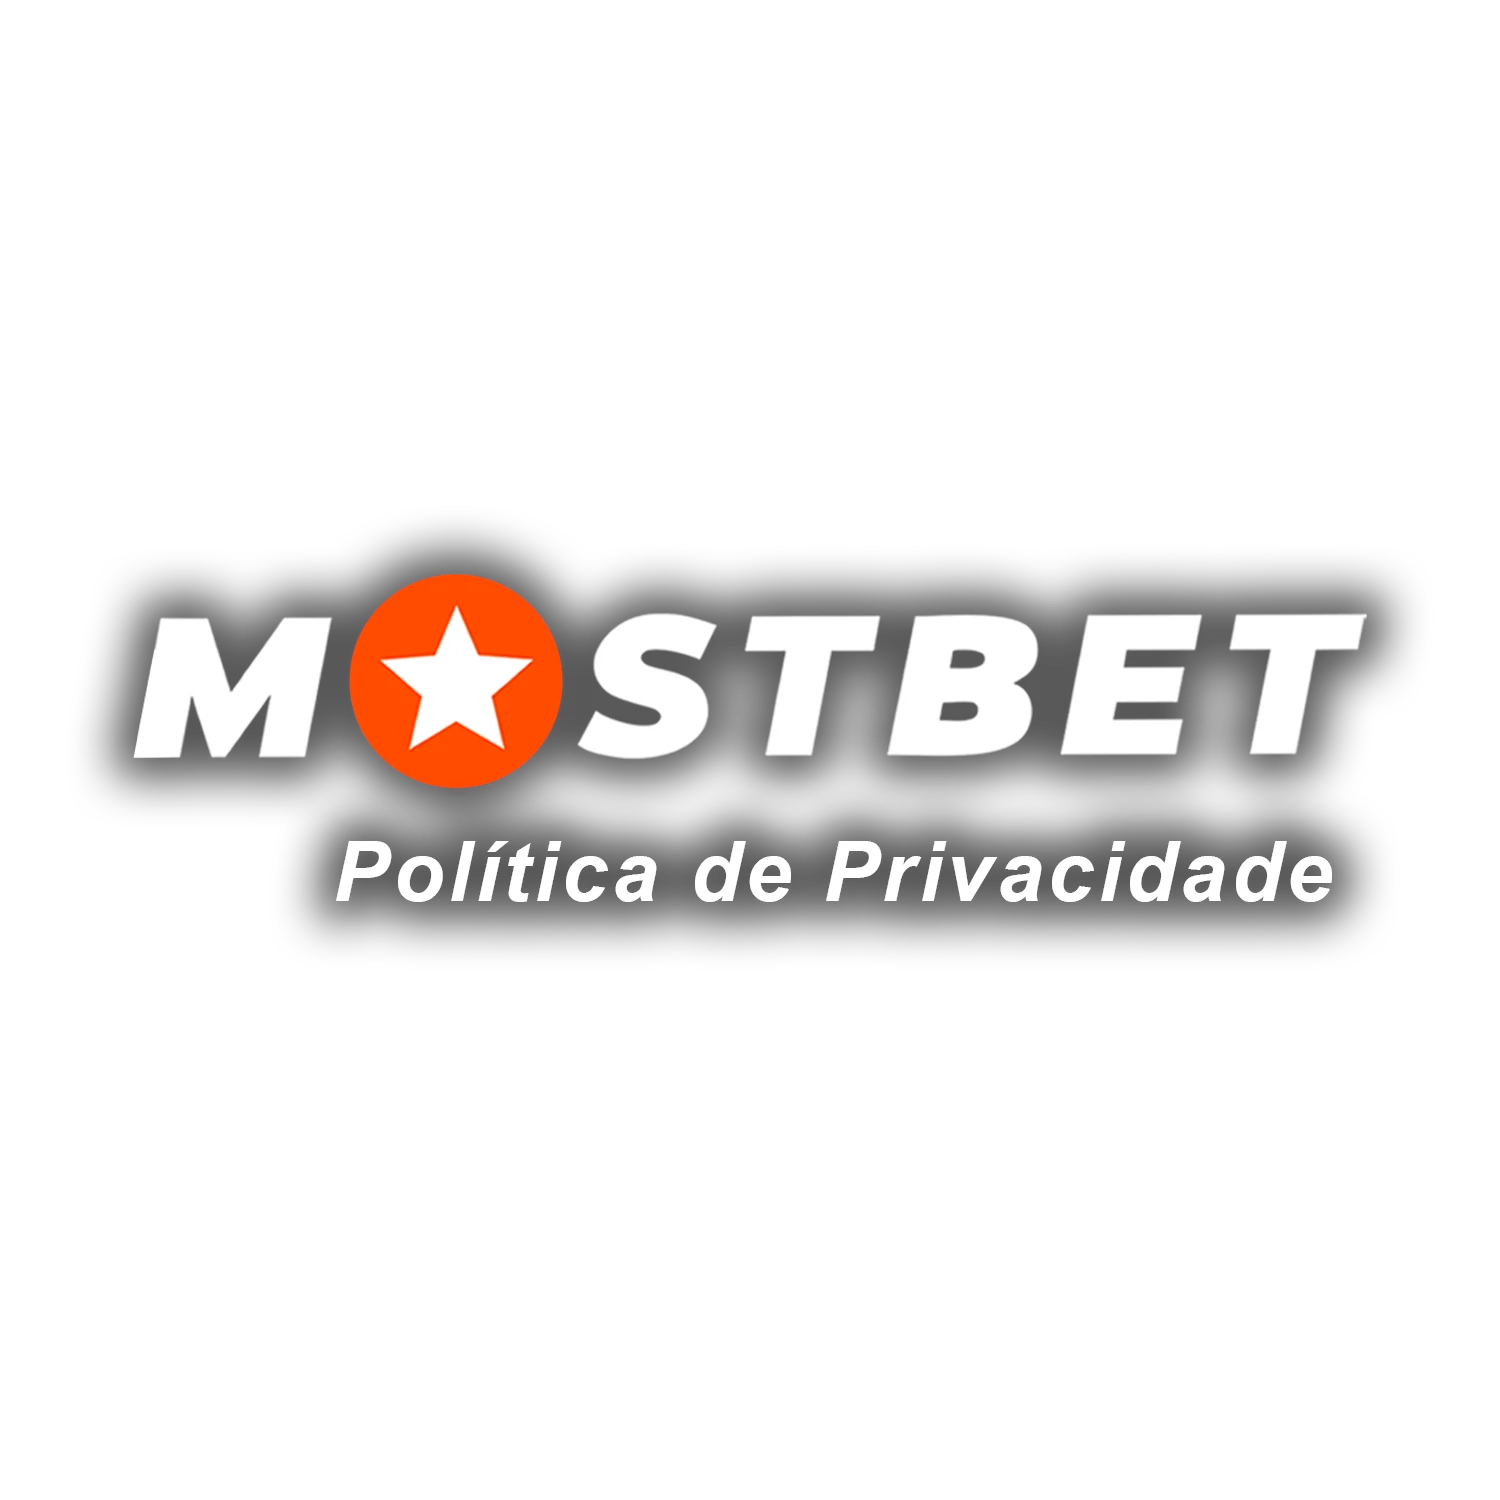 Find out about Mostbet's privacy policy.